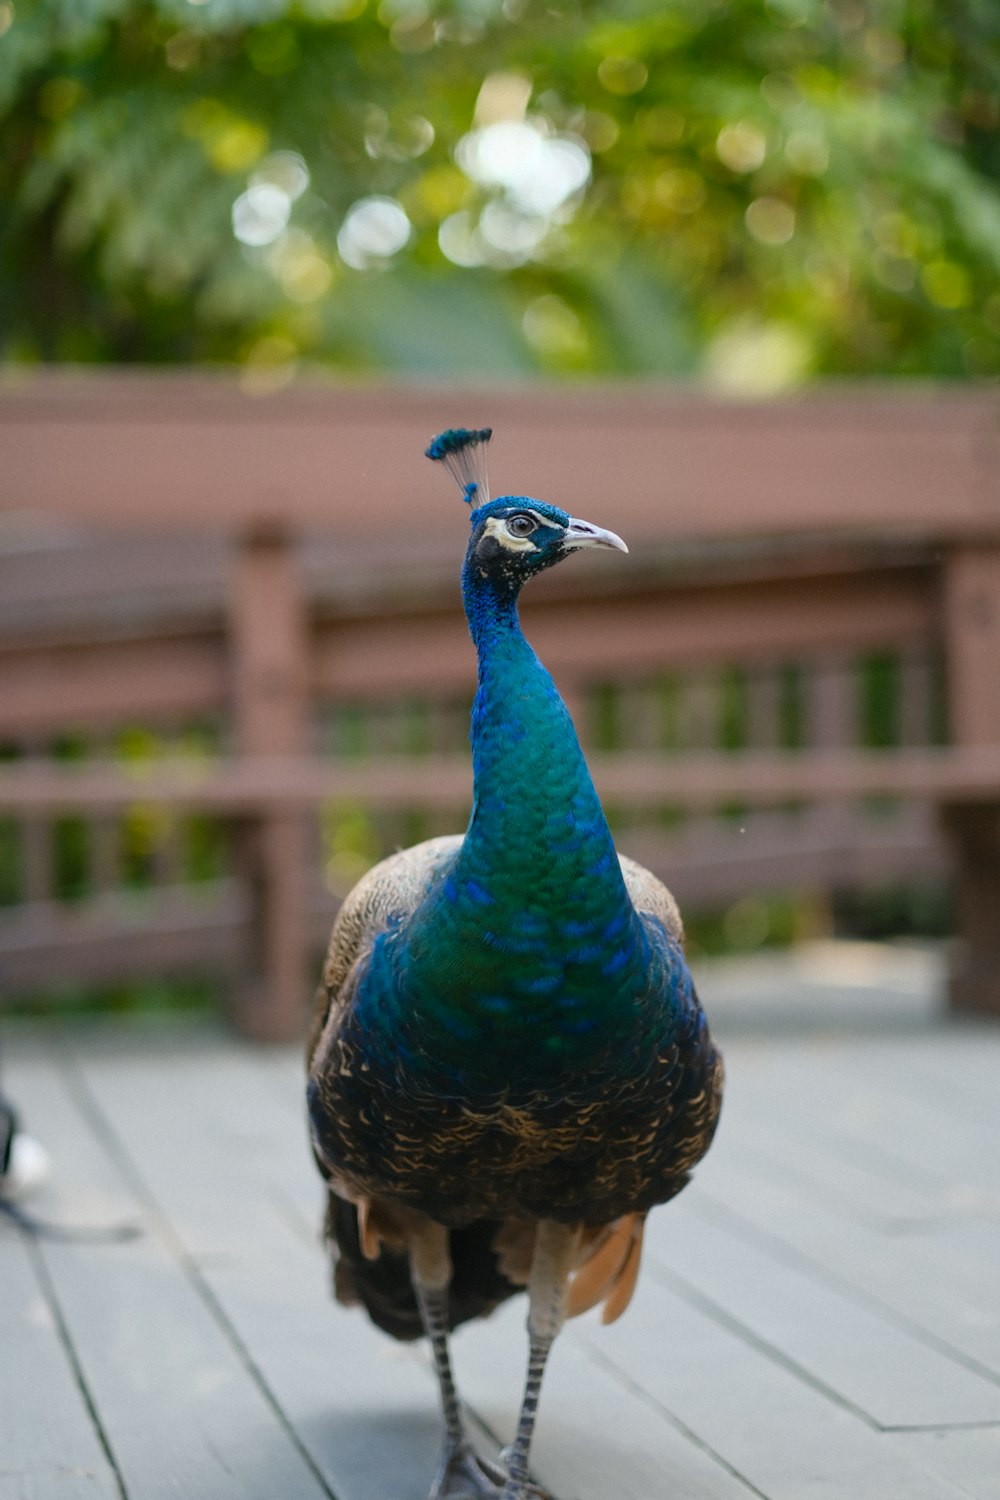 a peacock standing on top of a wooden deck